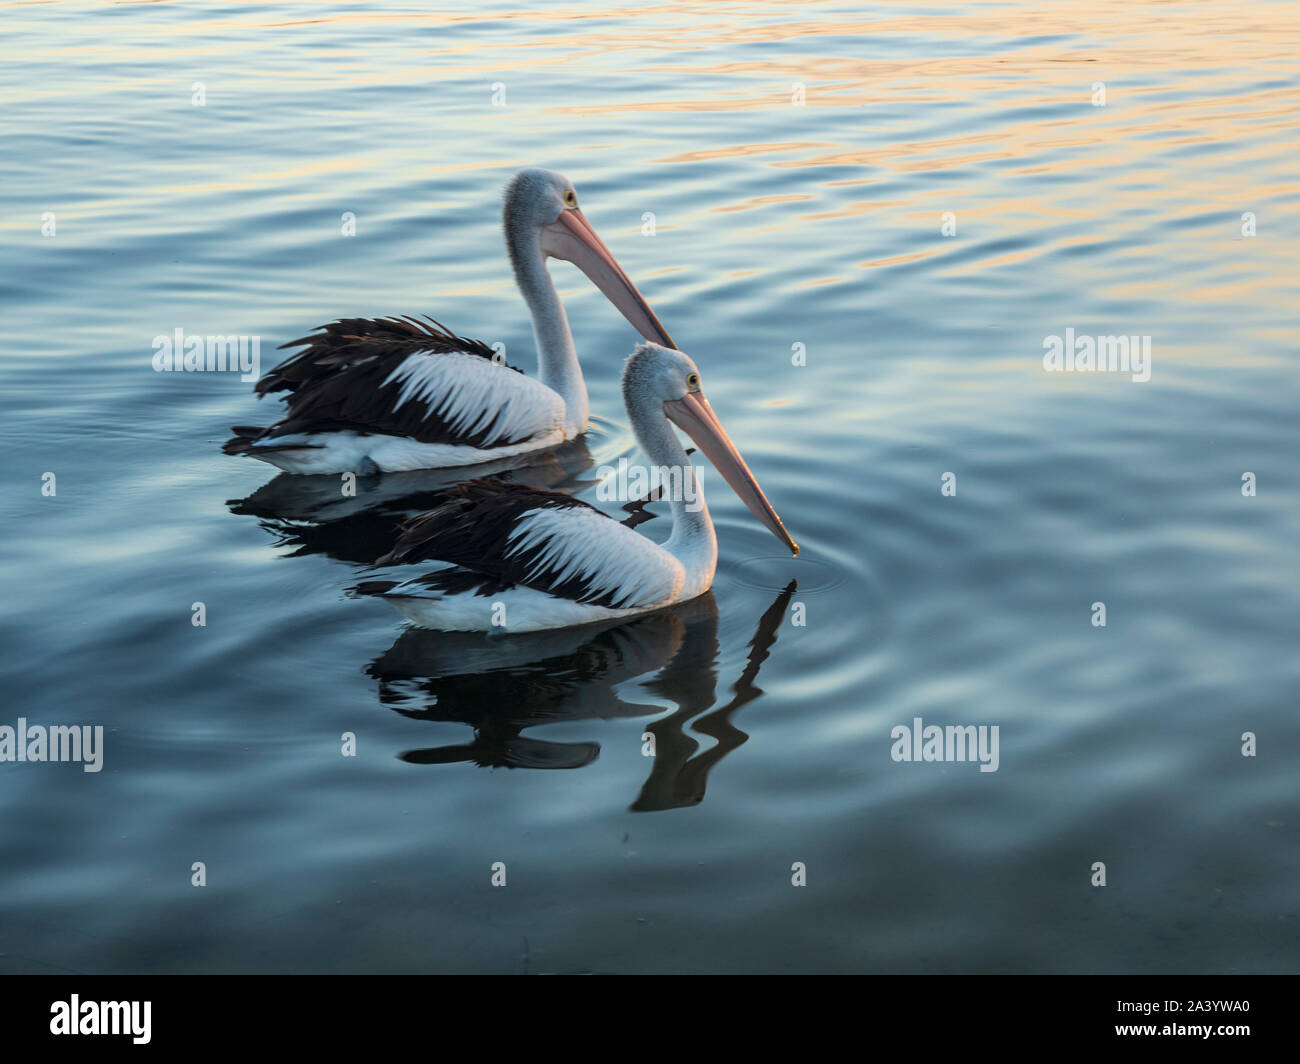 Pelicans on sea at sunset Stock Photo